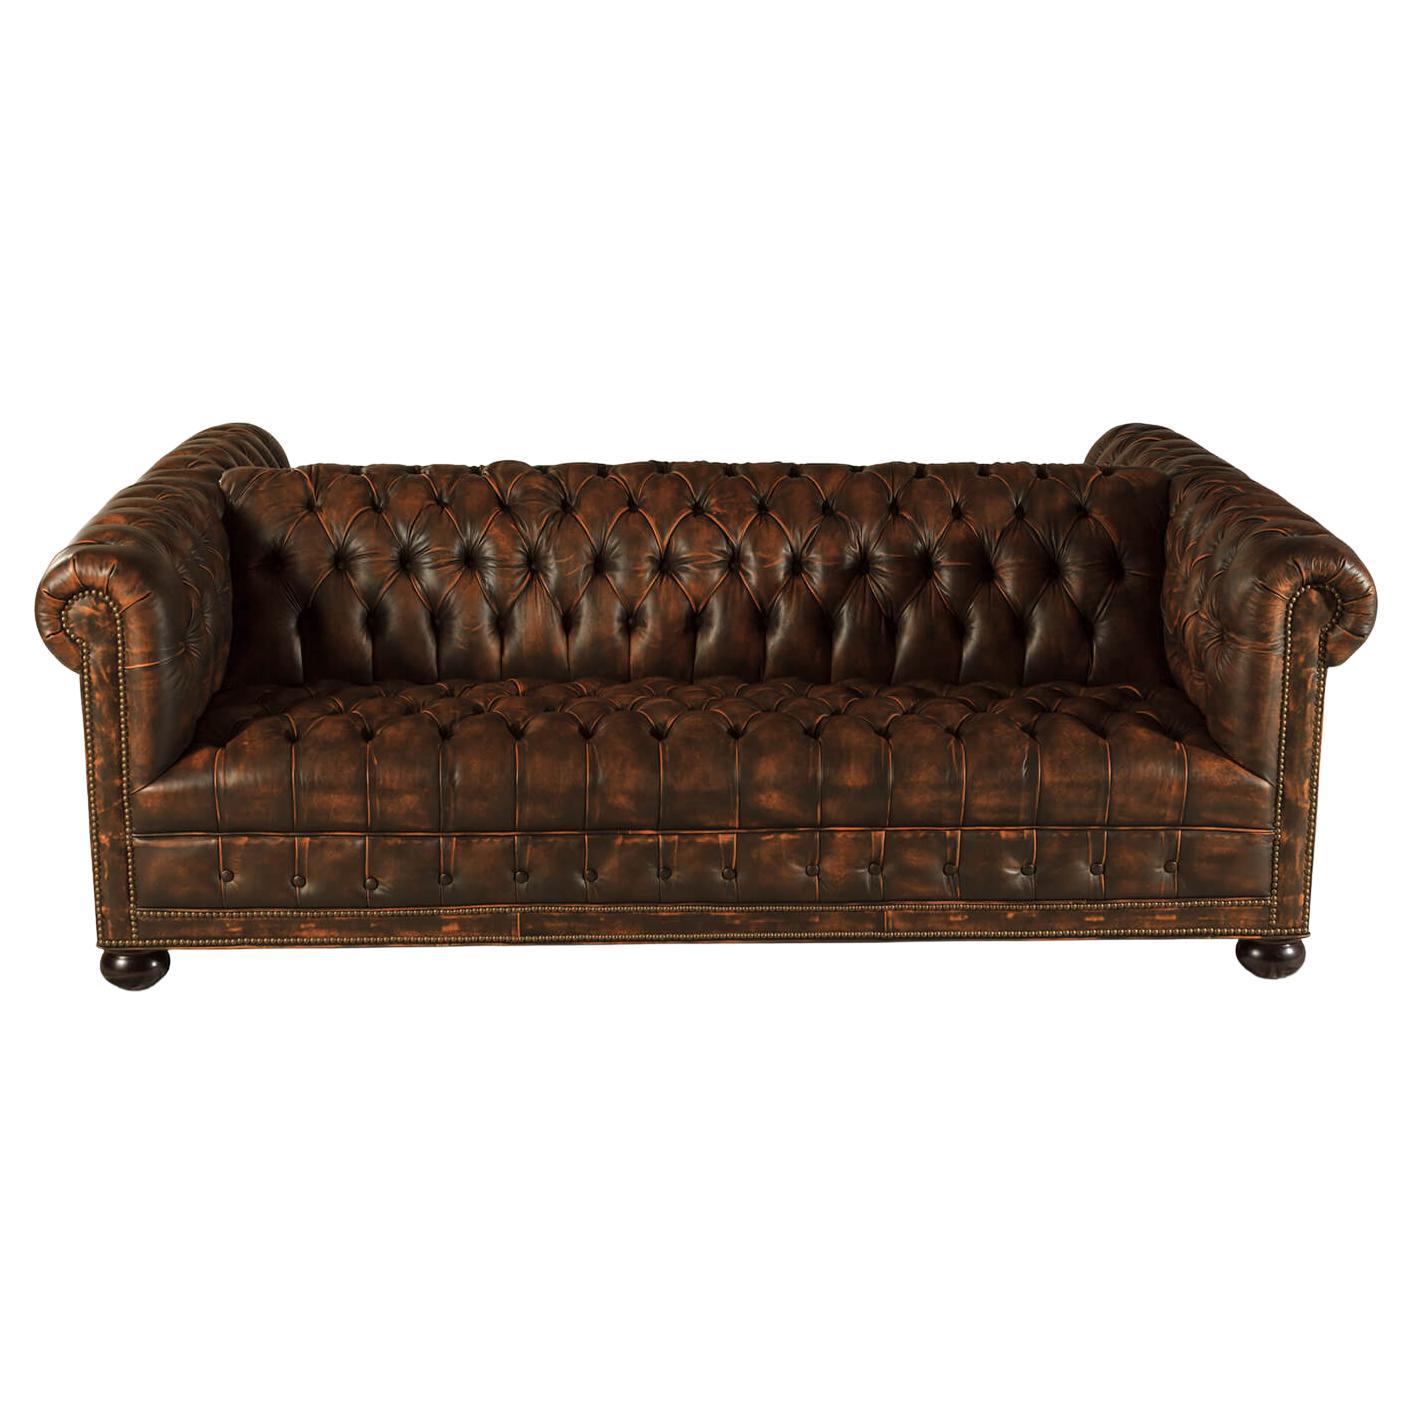 Double Sided Chesterfield Sofa For Sale